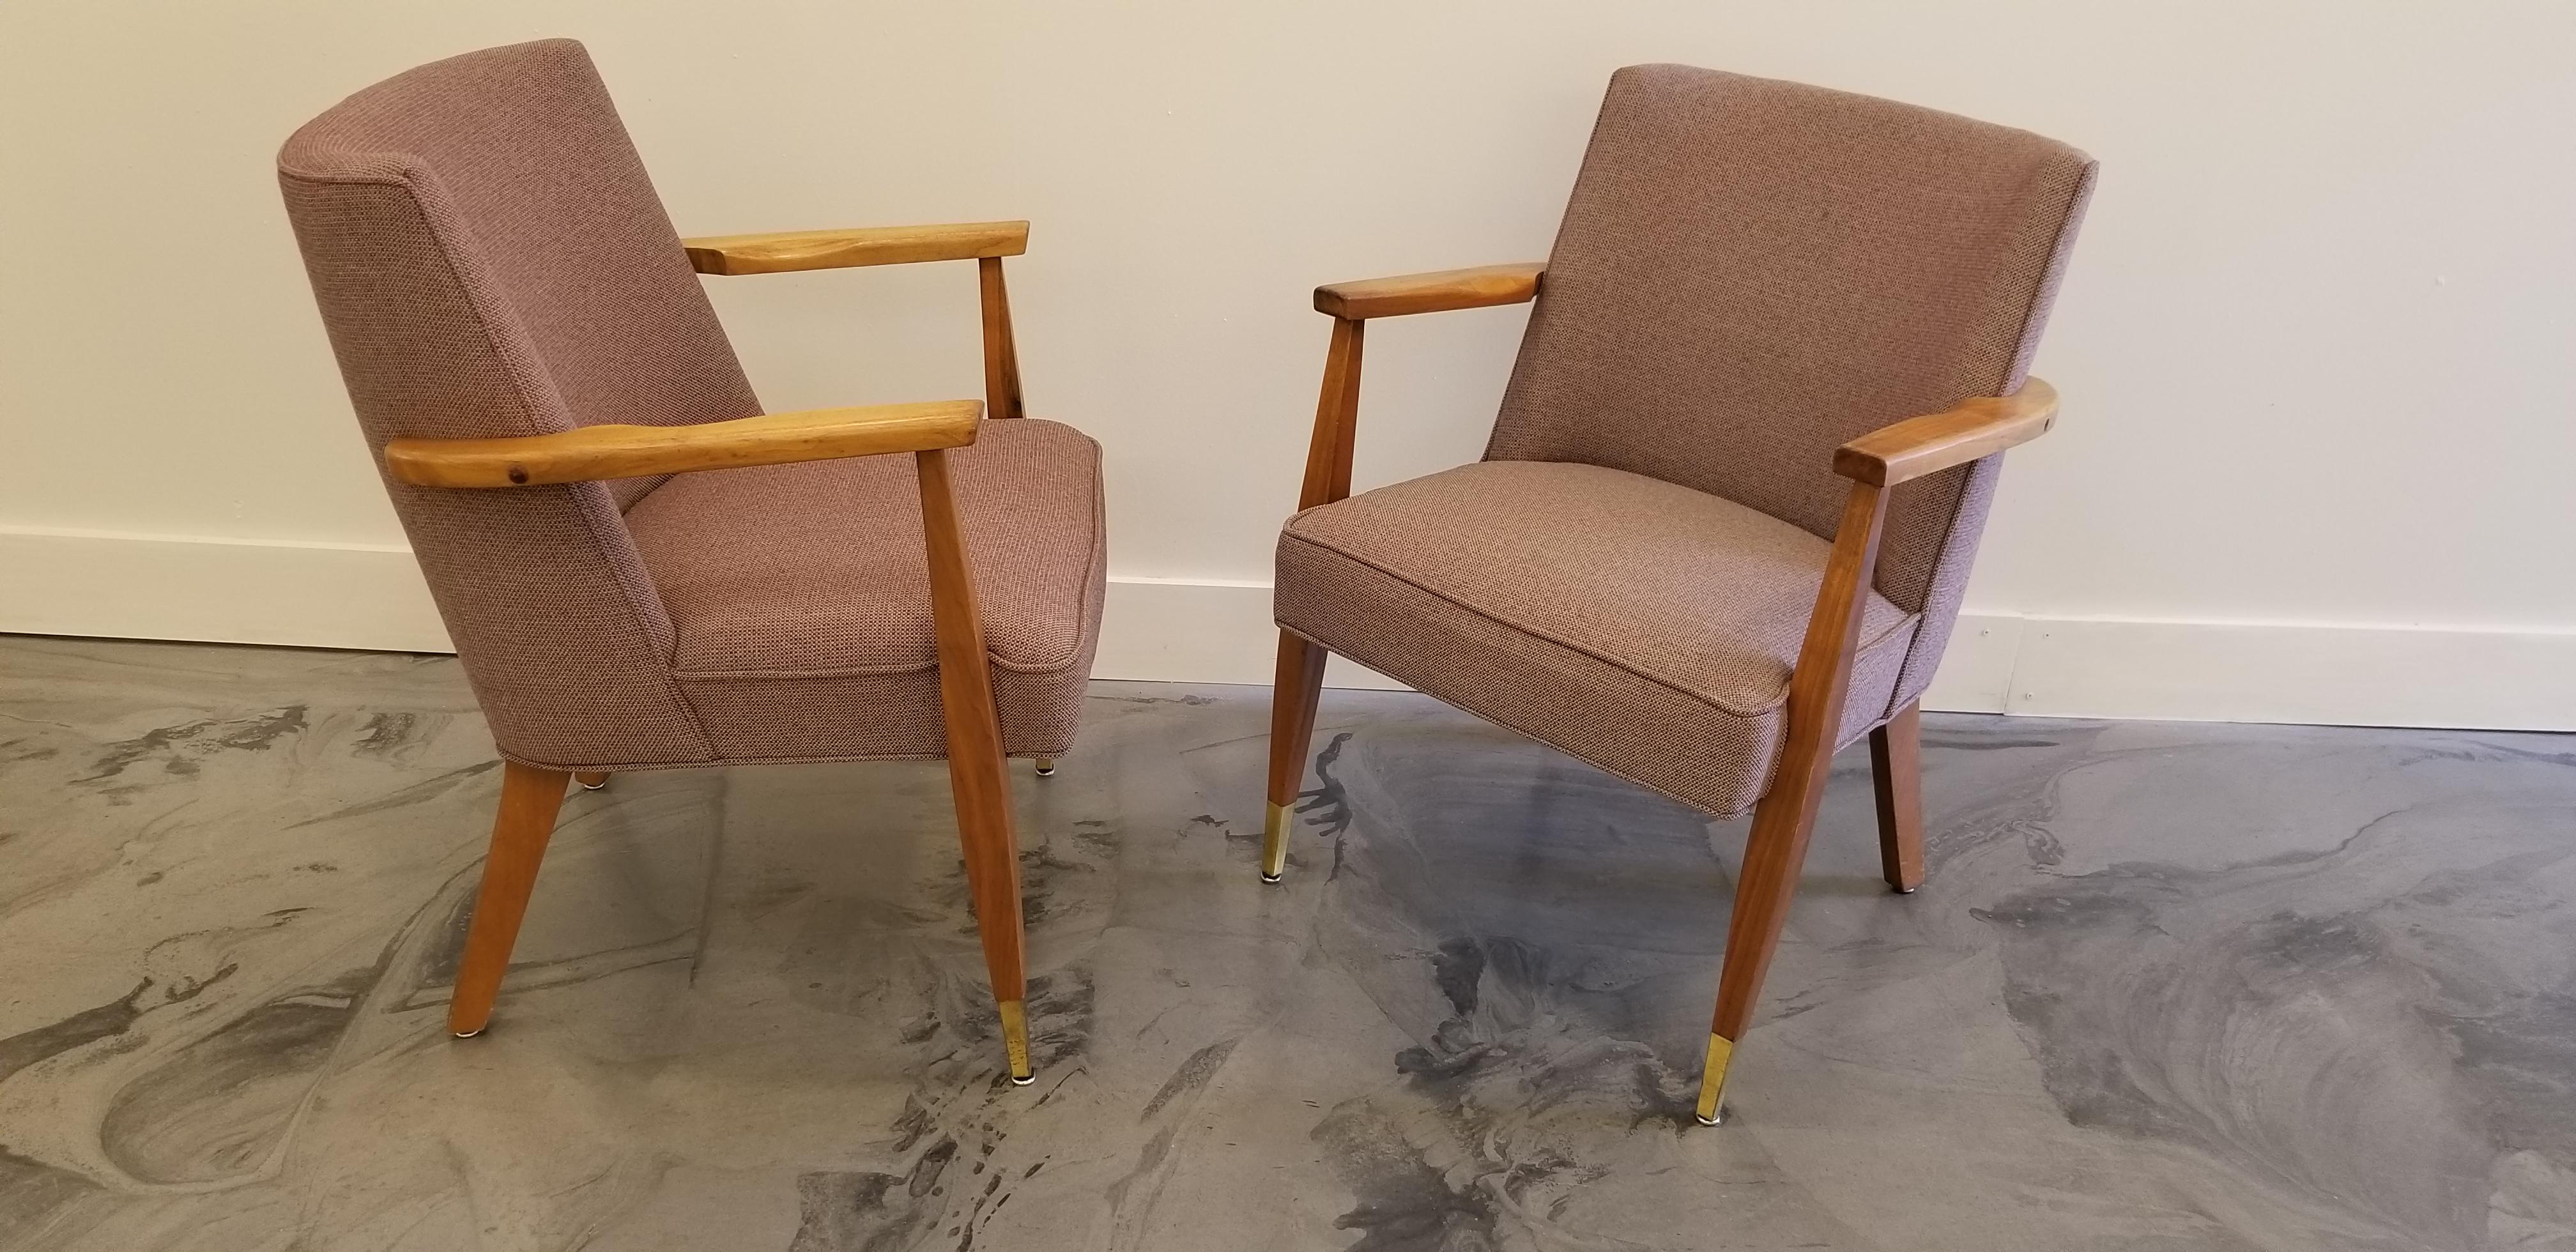 Mid-20th Century Pair Mid-Century Modern Side Chairs For Sale